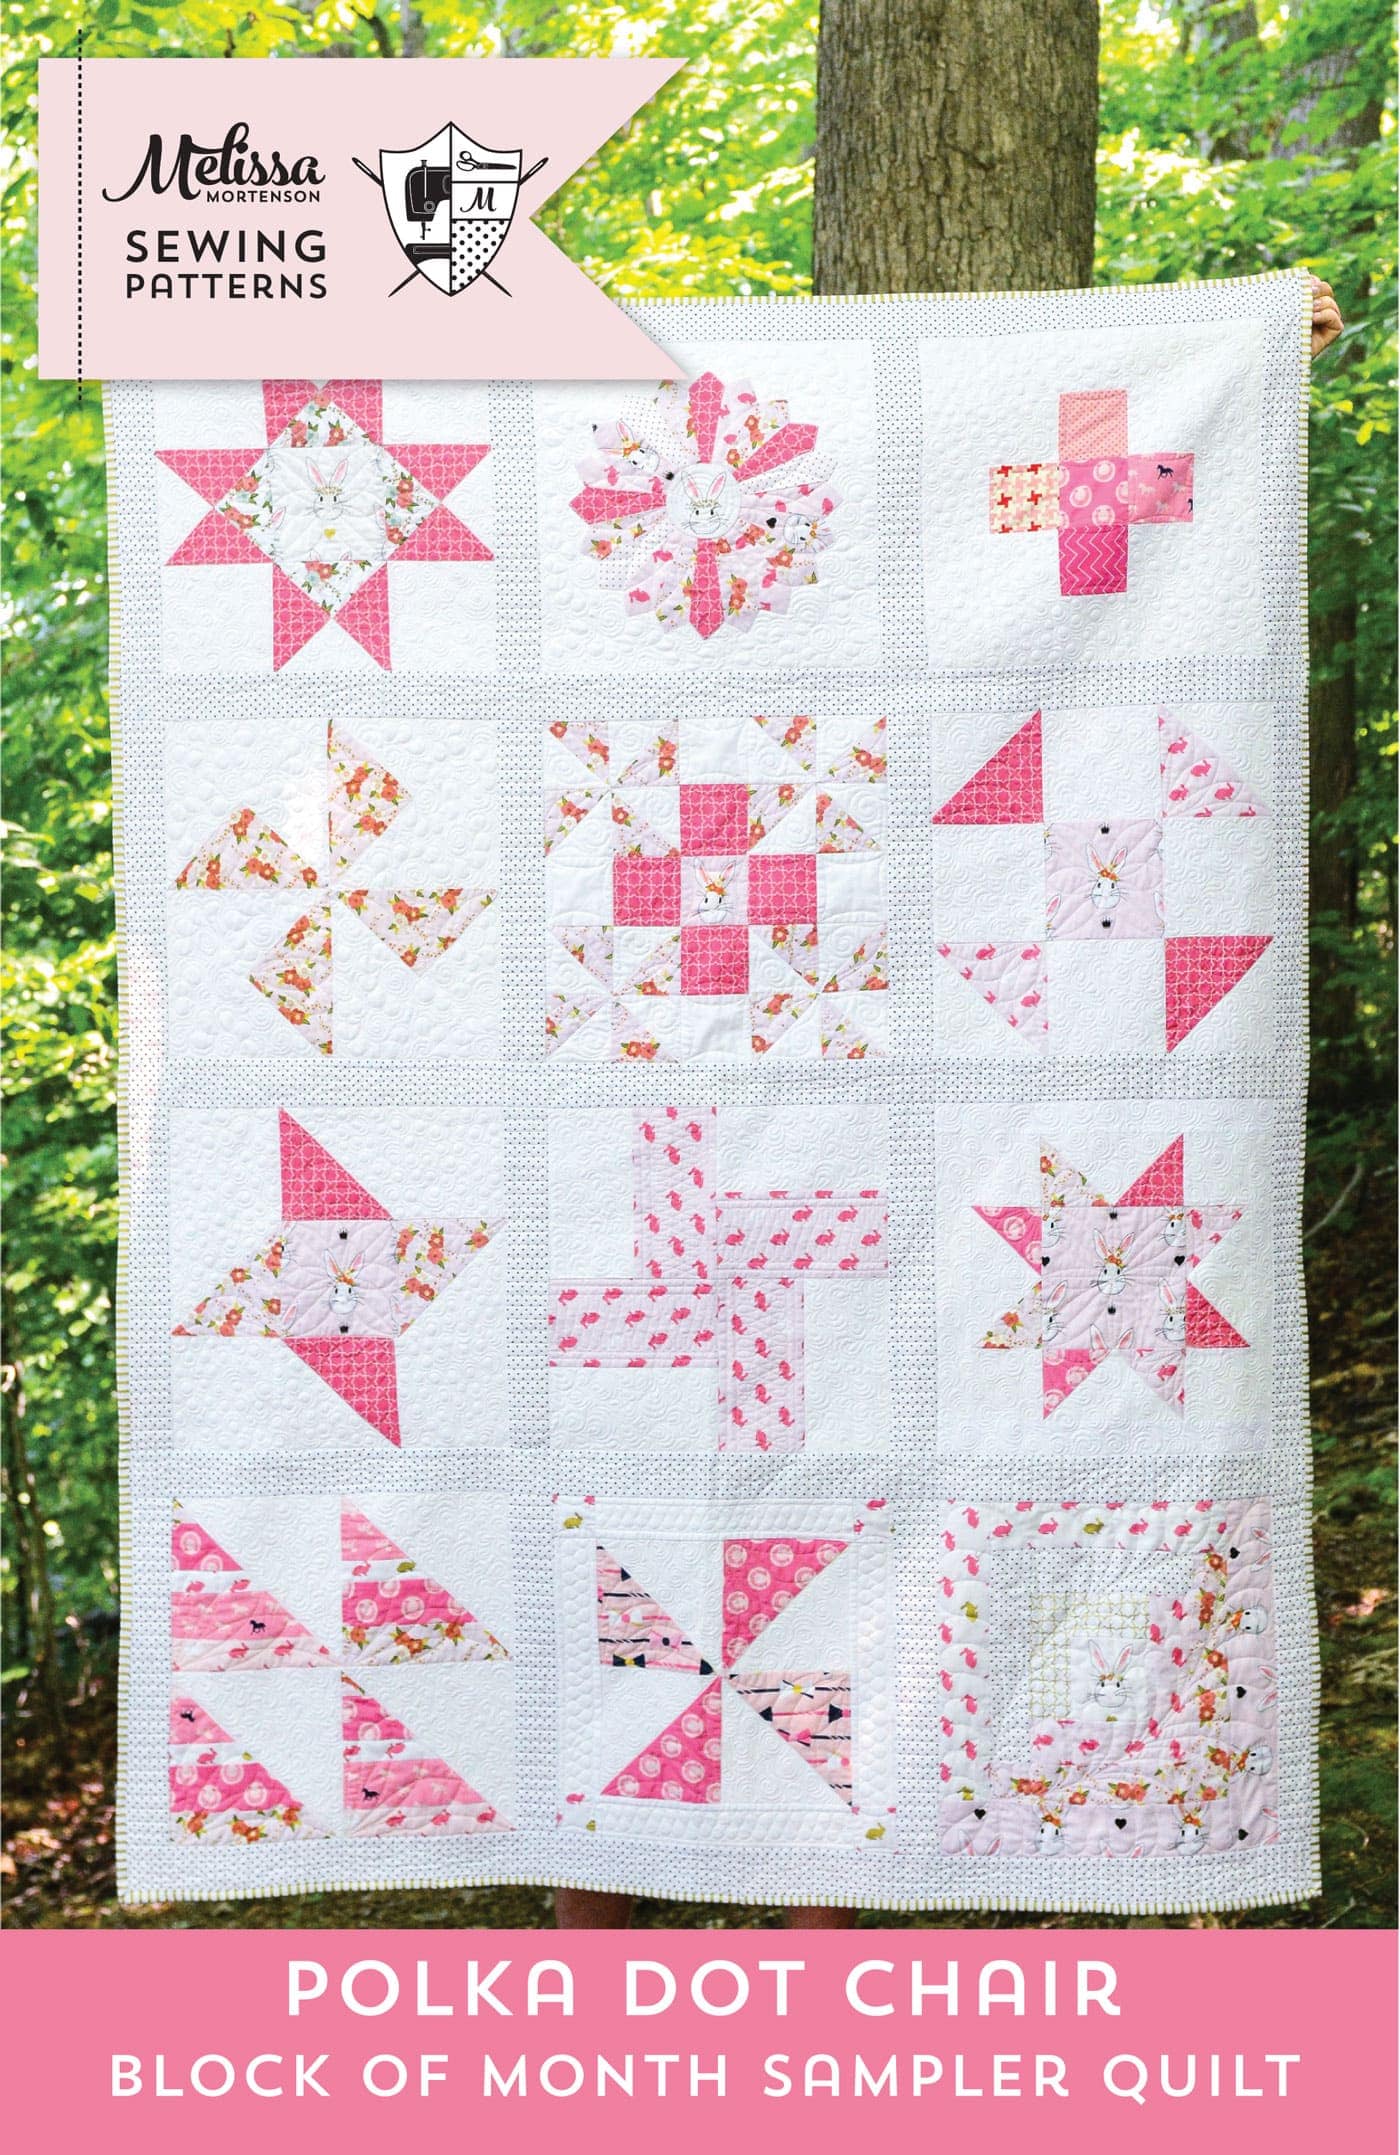 Quilt Block of the Month series on polkadotchair.com - create a quilt in 12 easy steps!